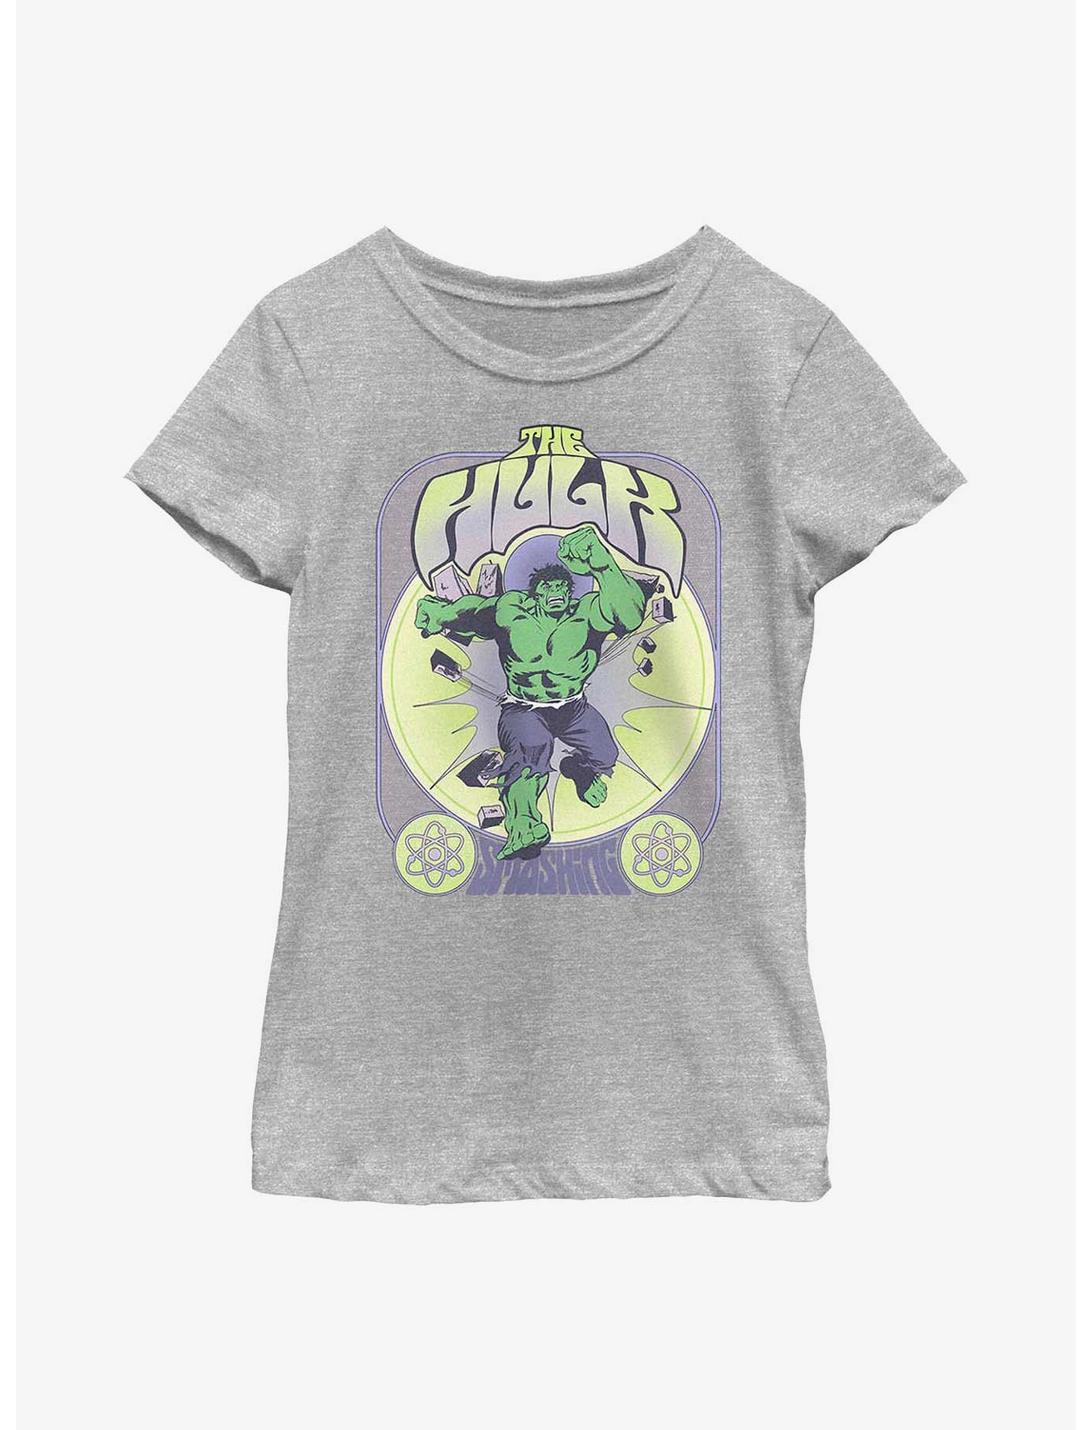 Marvel The Incredible Hulk Groovy Youth Girls T-Shirt, ATH HTR, hi-res